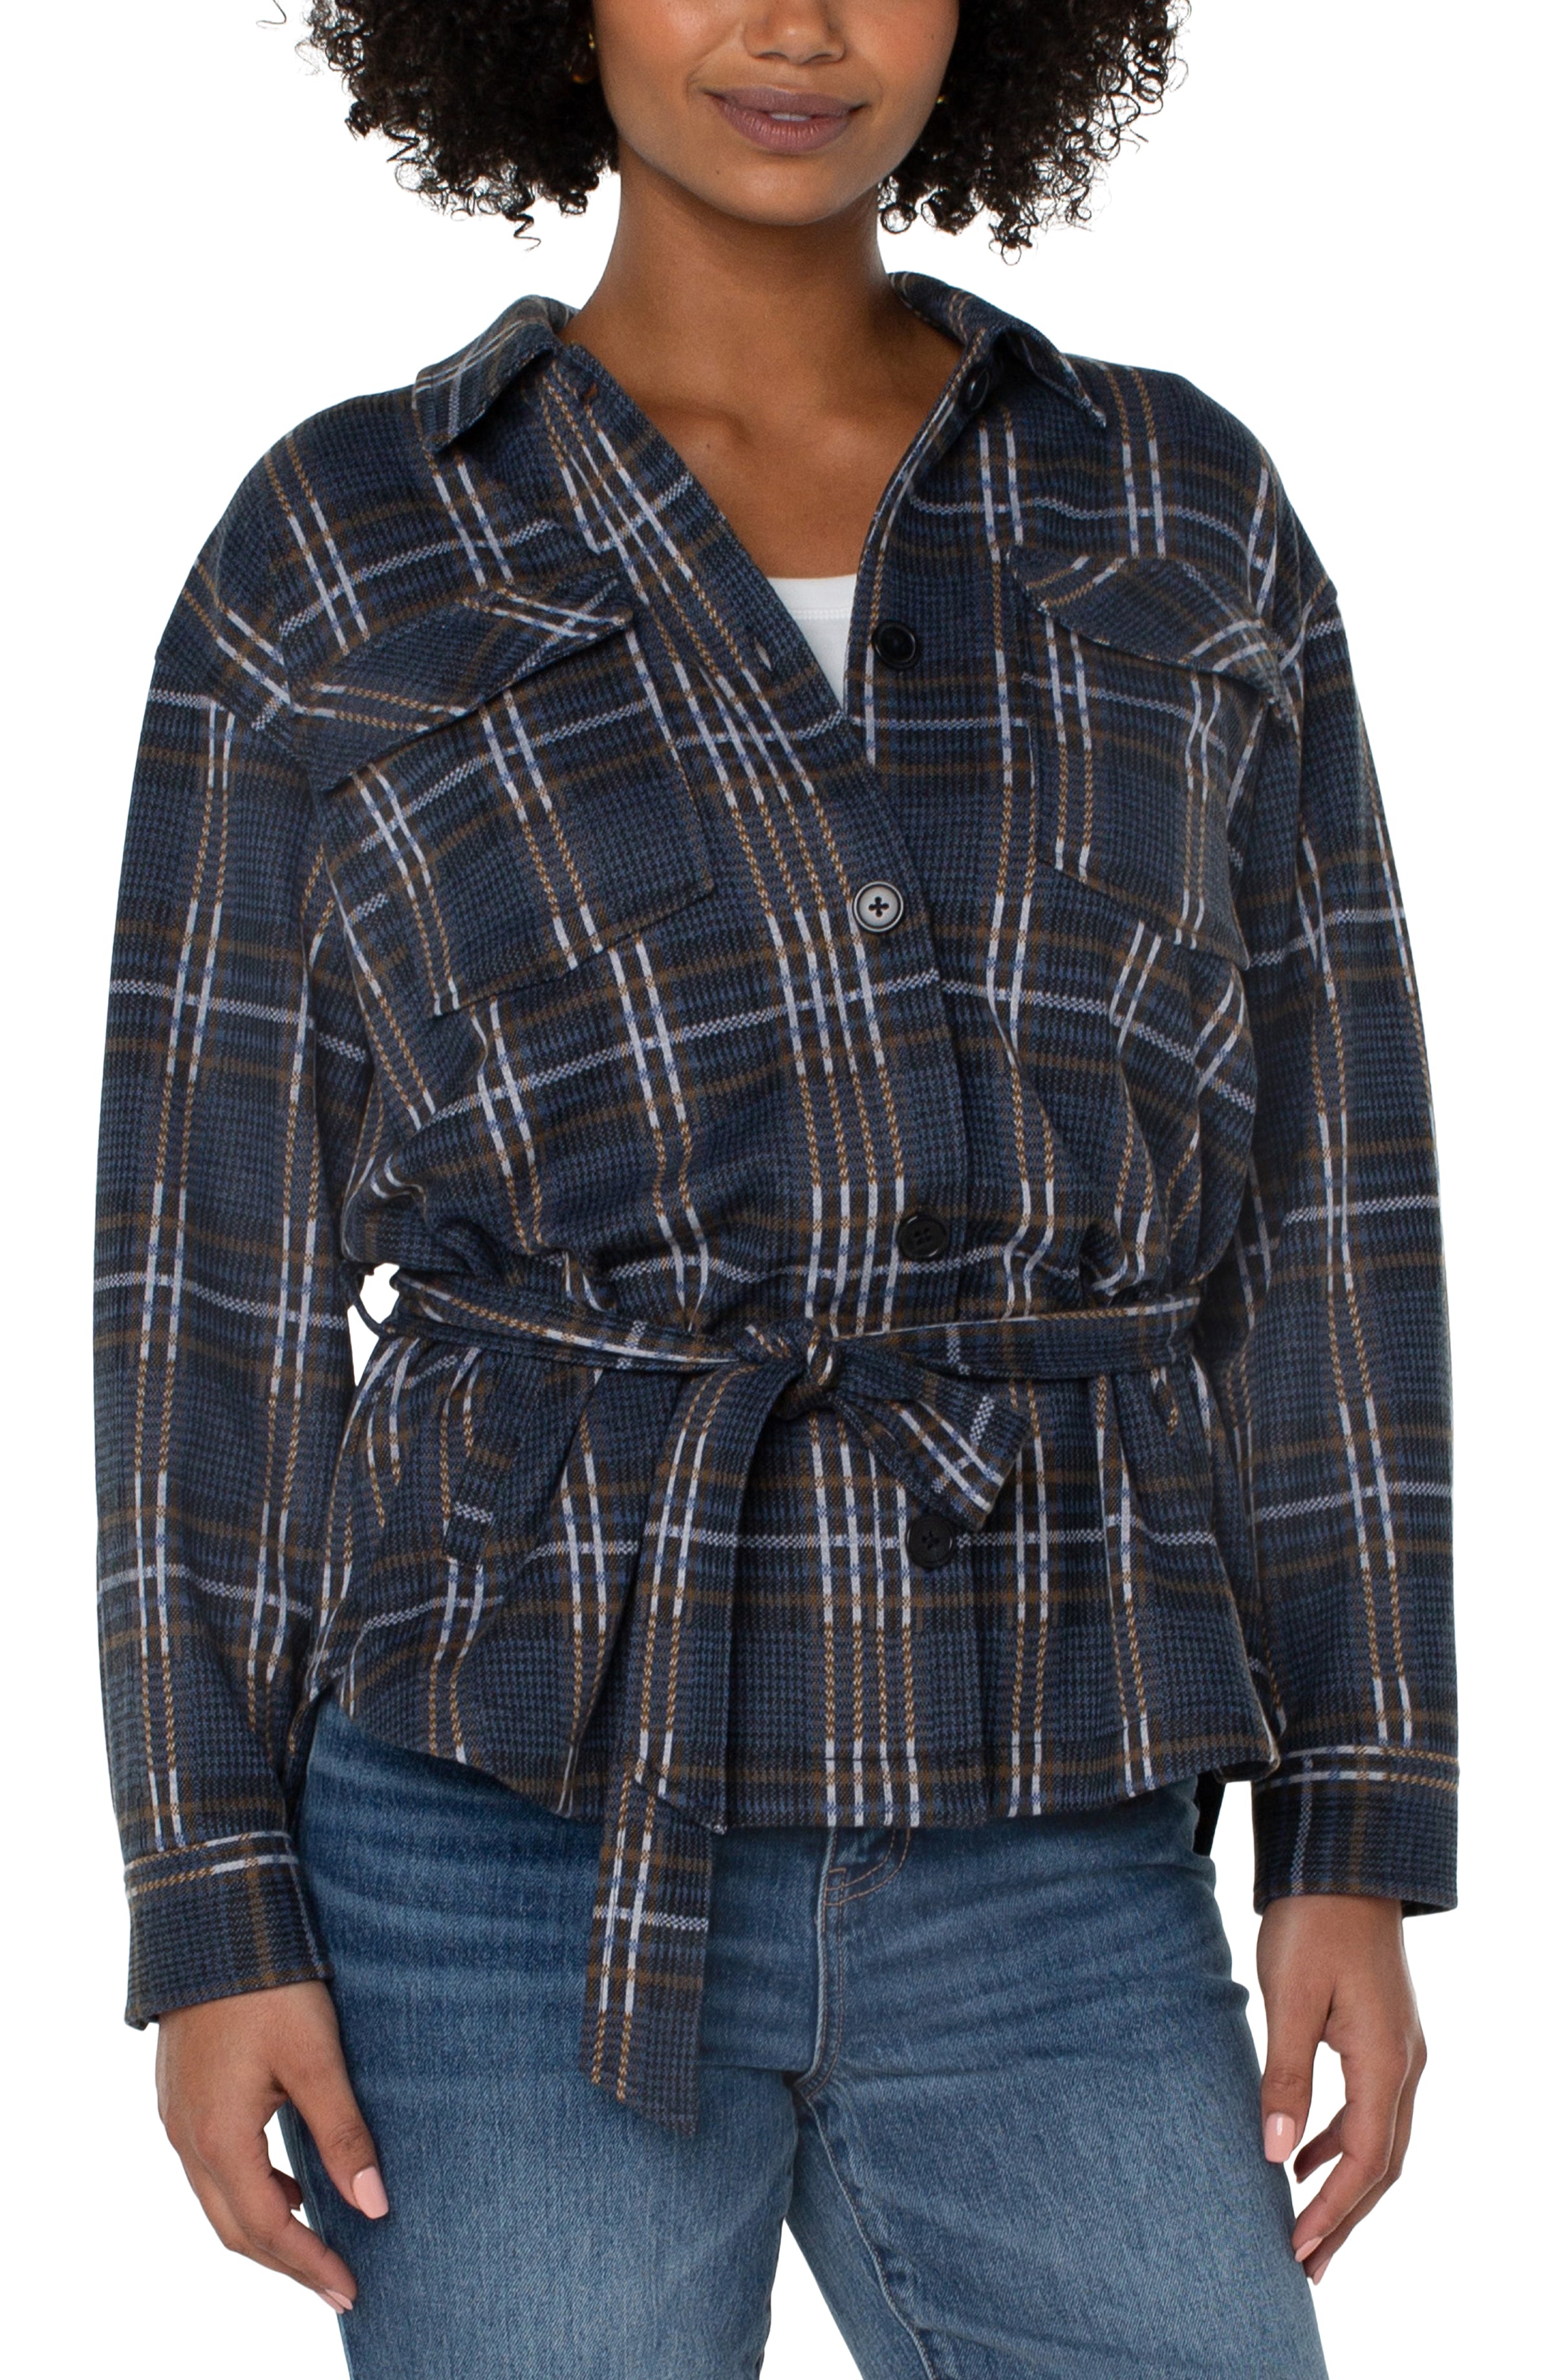 Liverpool Casual Jacket - Black Queen Blue Plaid Front View